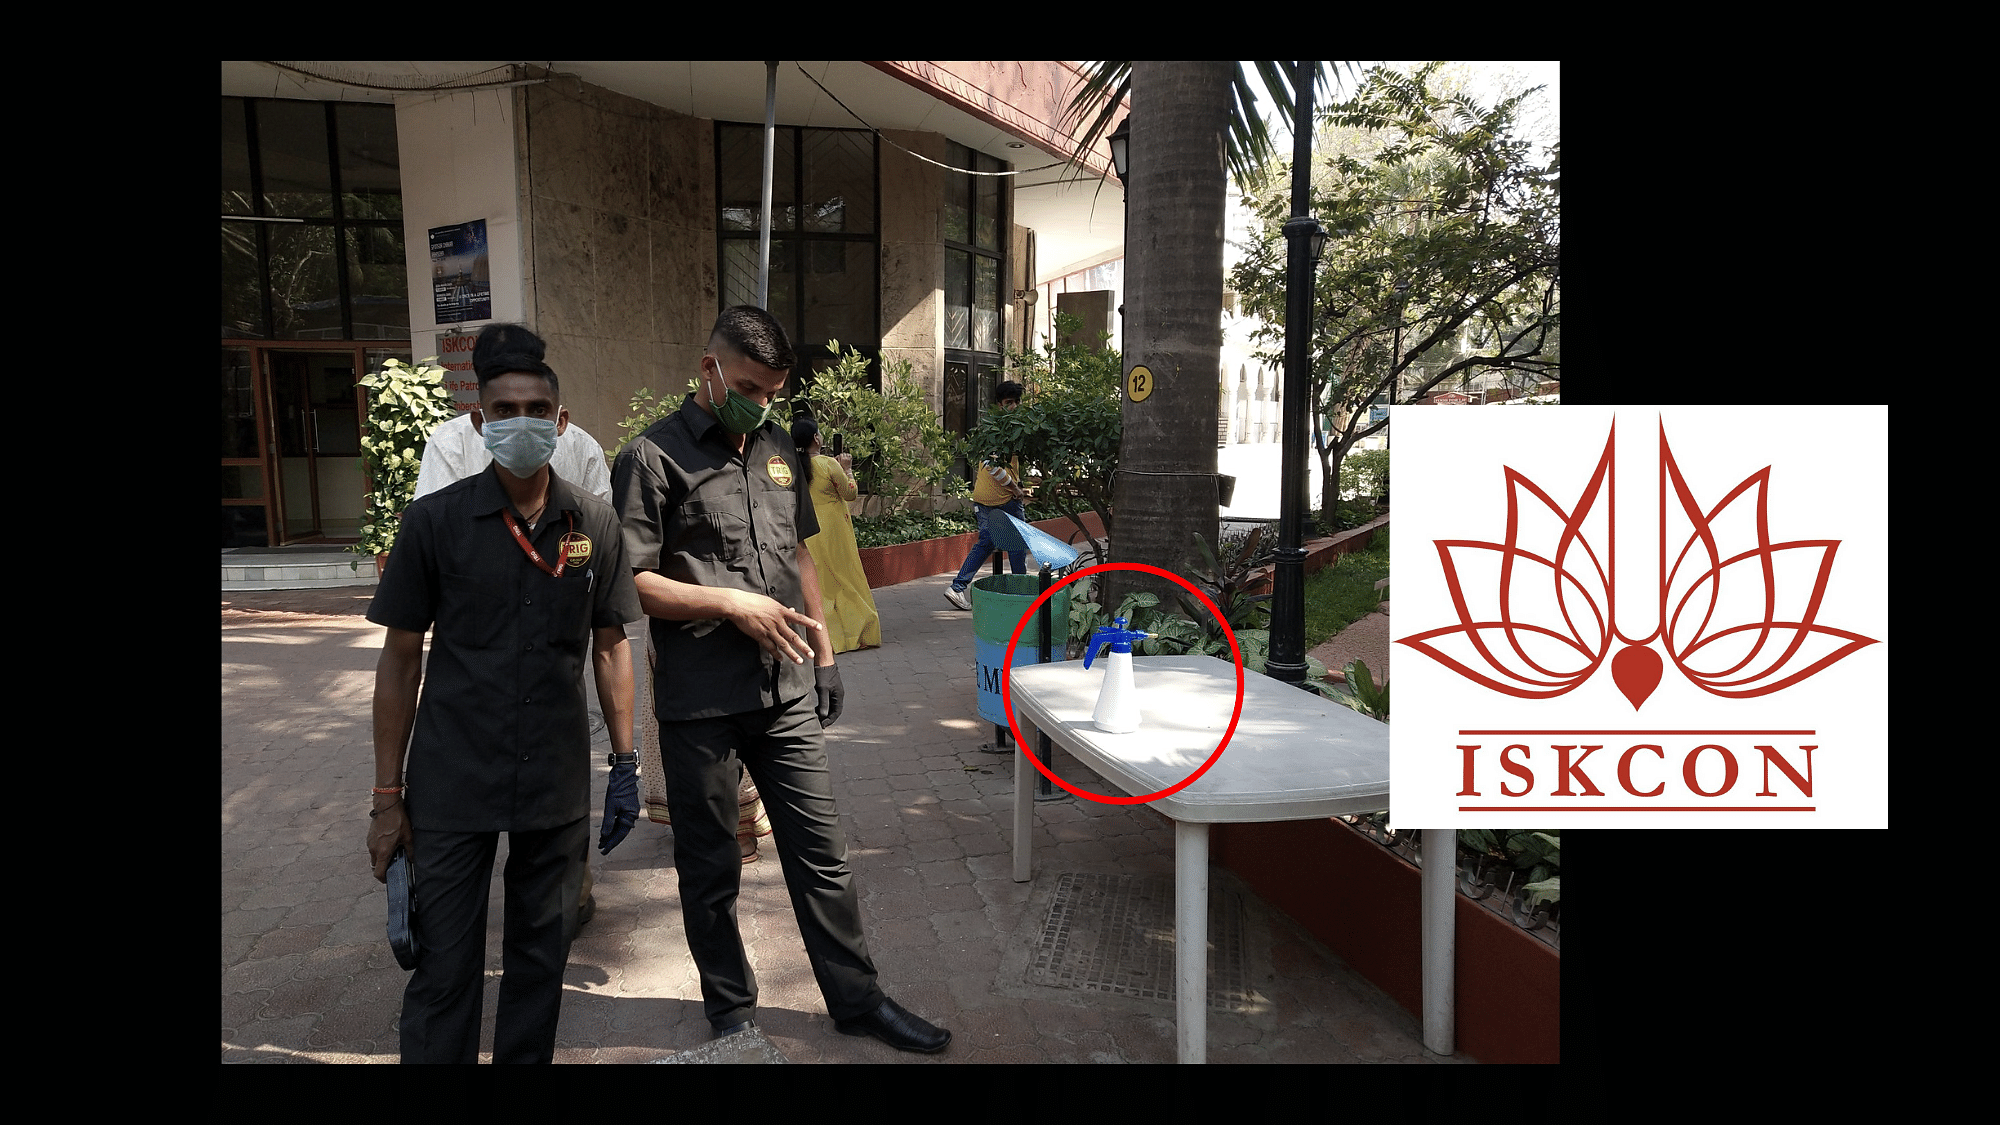 ISKCON has confirmed that security personnel at an ISKCON complex in Juhu, Mumbai, were spraying gaumutra on visitors’ hands as a “precaution for coronavirus”.